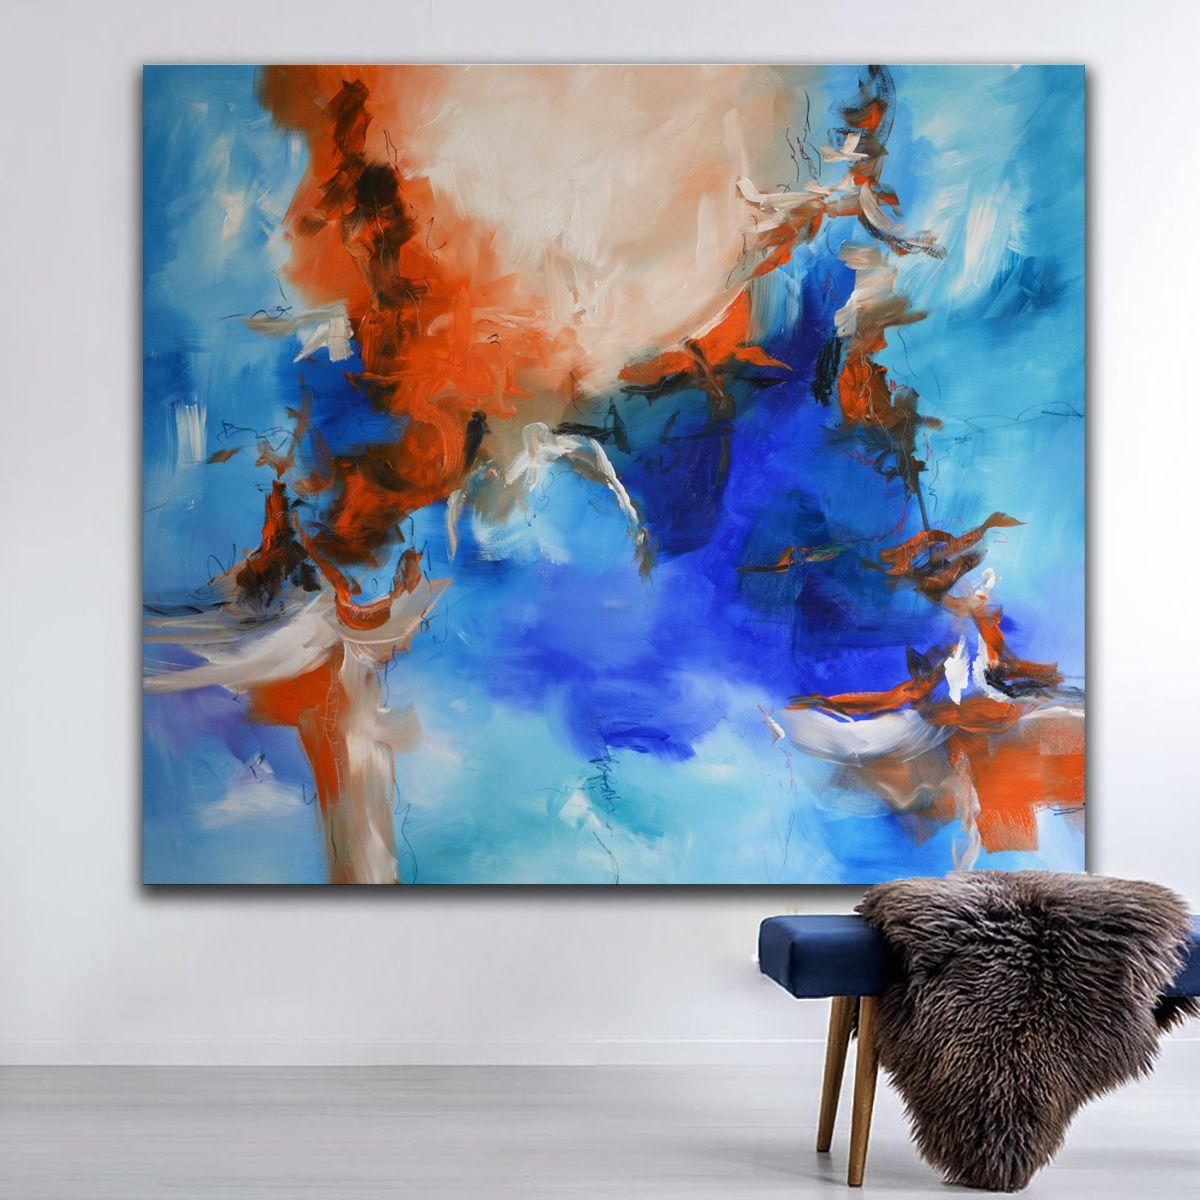 Birds Migrate at Night, Painting, Acrylic on Canvas - Blue Abstract Painting by Andrada Anghel